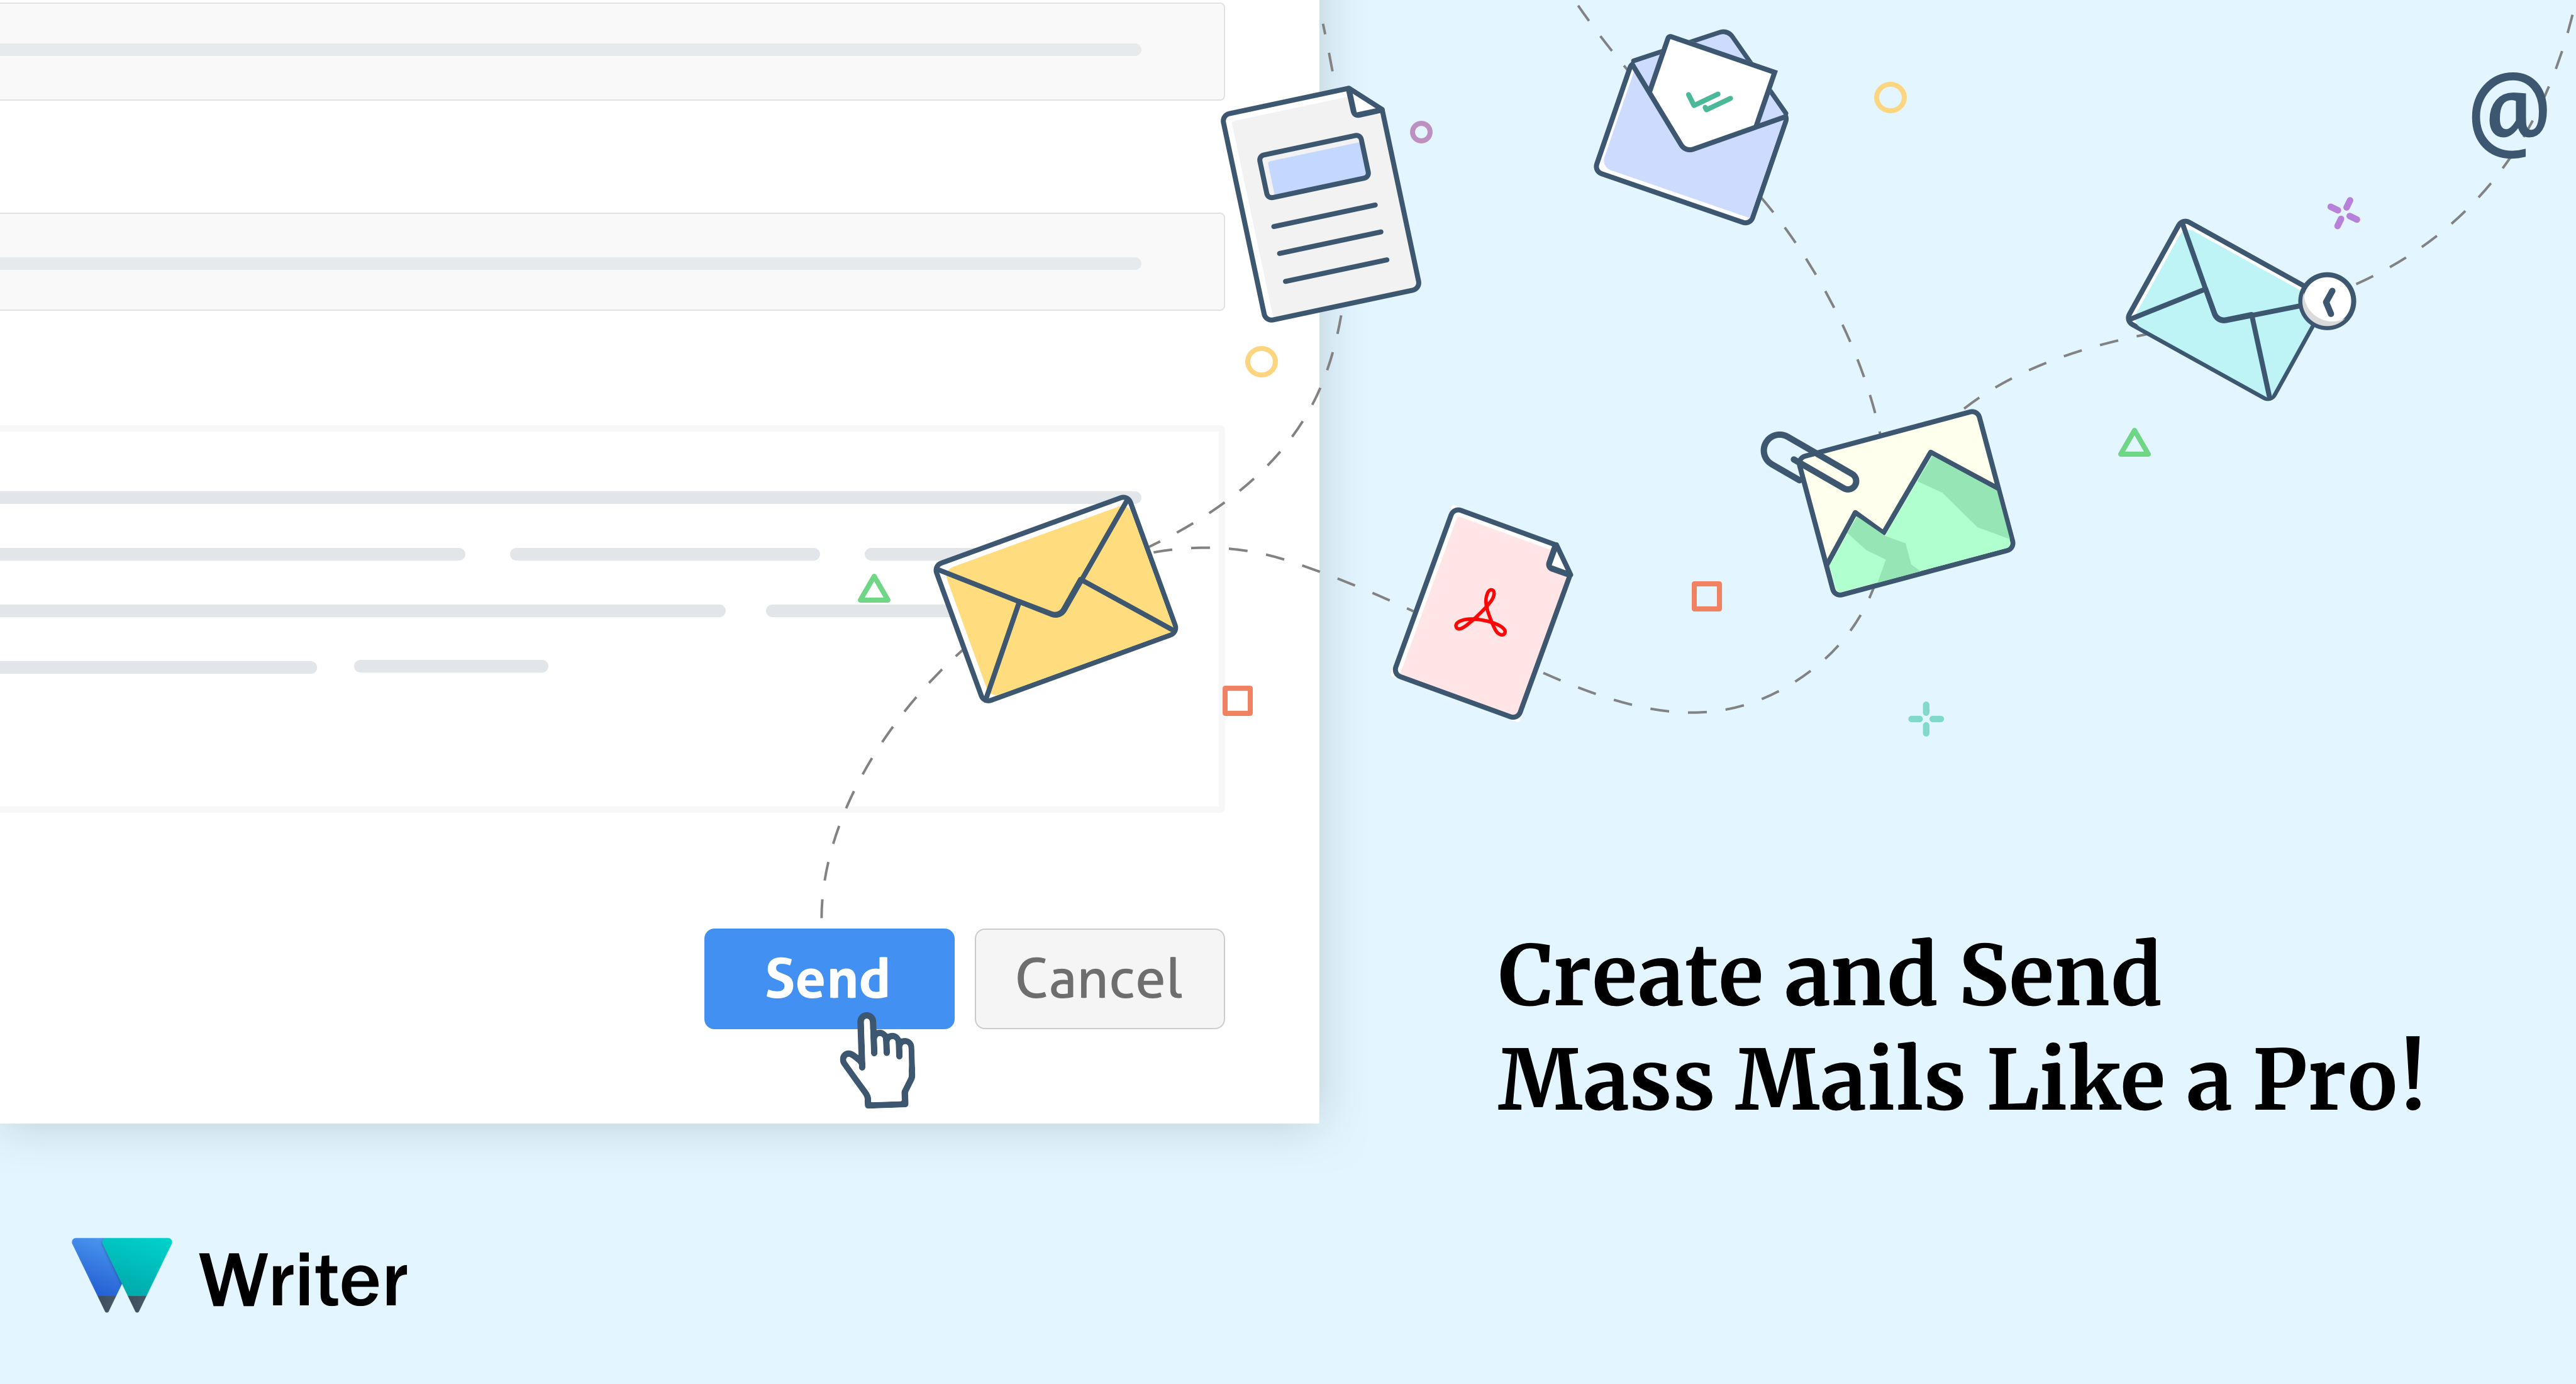 How Mail Merge Can Help You Personalize and Send Mass Mails